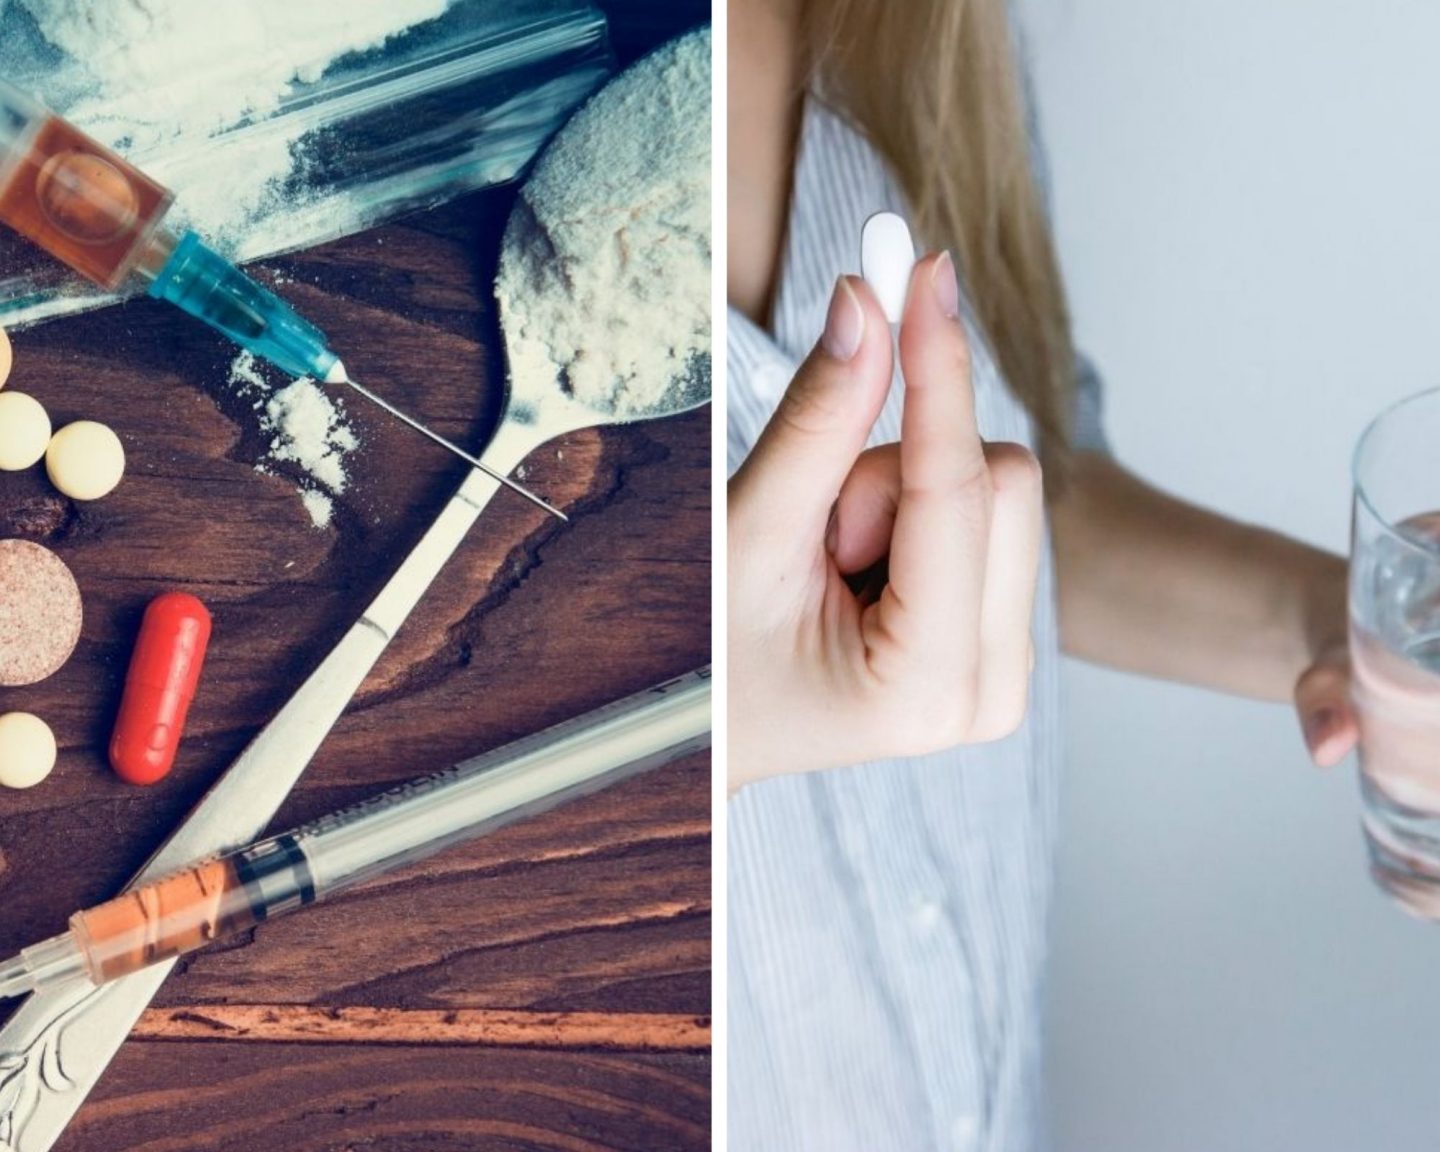 A collage of two photos showing the difference between the opioid crisis with illegal use and misuse, and chronic pain medicating. To the left : A birds eye view close up of a wooden table, with a spoon full of powder, two syringes, a baggie of powder and various pills strewn about to indicate the illegal aspects of the opioid crisis. To the right : A close up of a woman with a glass of water in one hand and a white pill in the other.